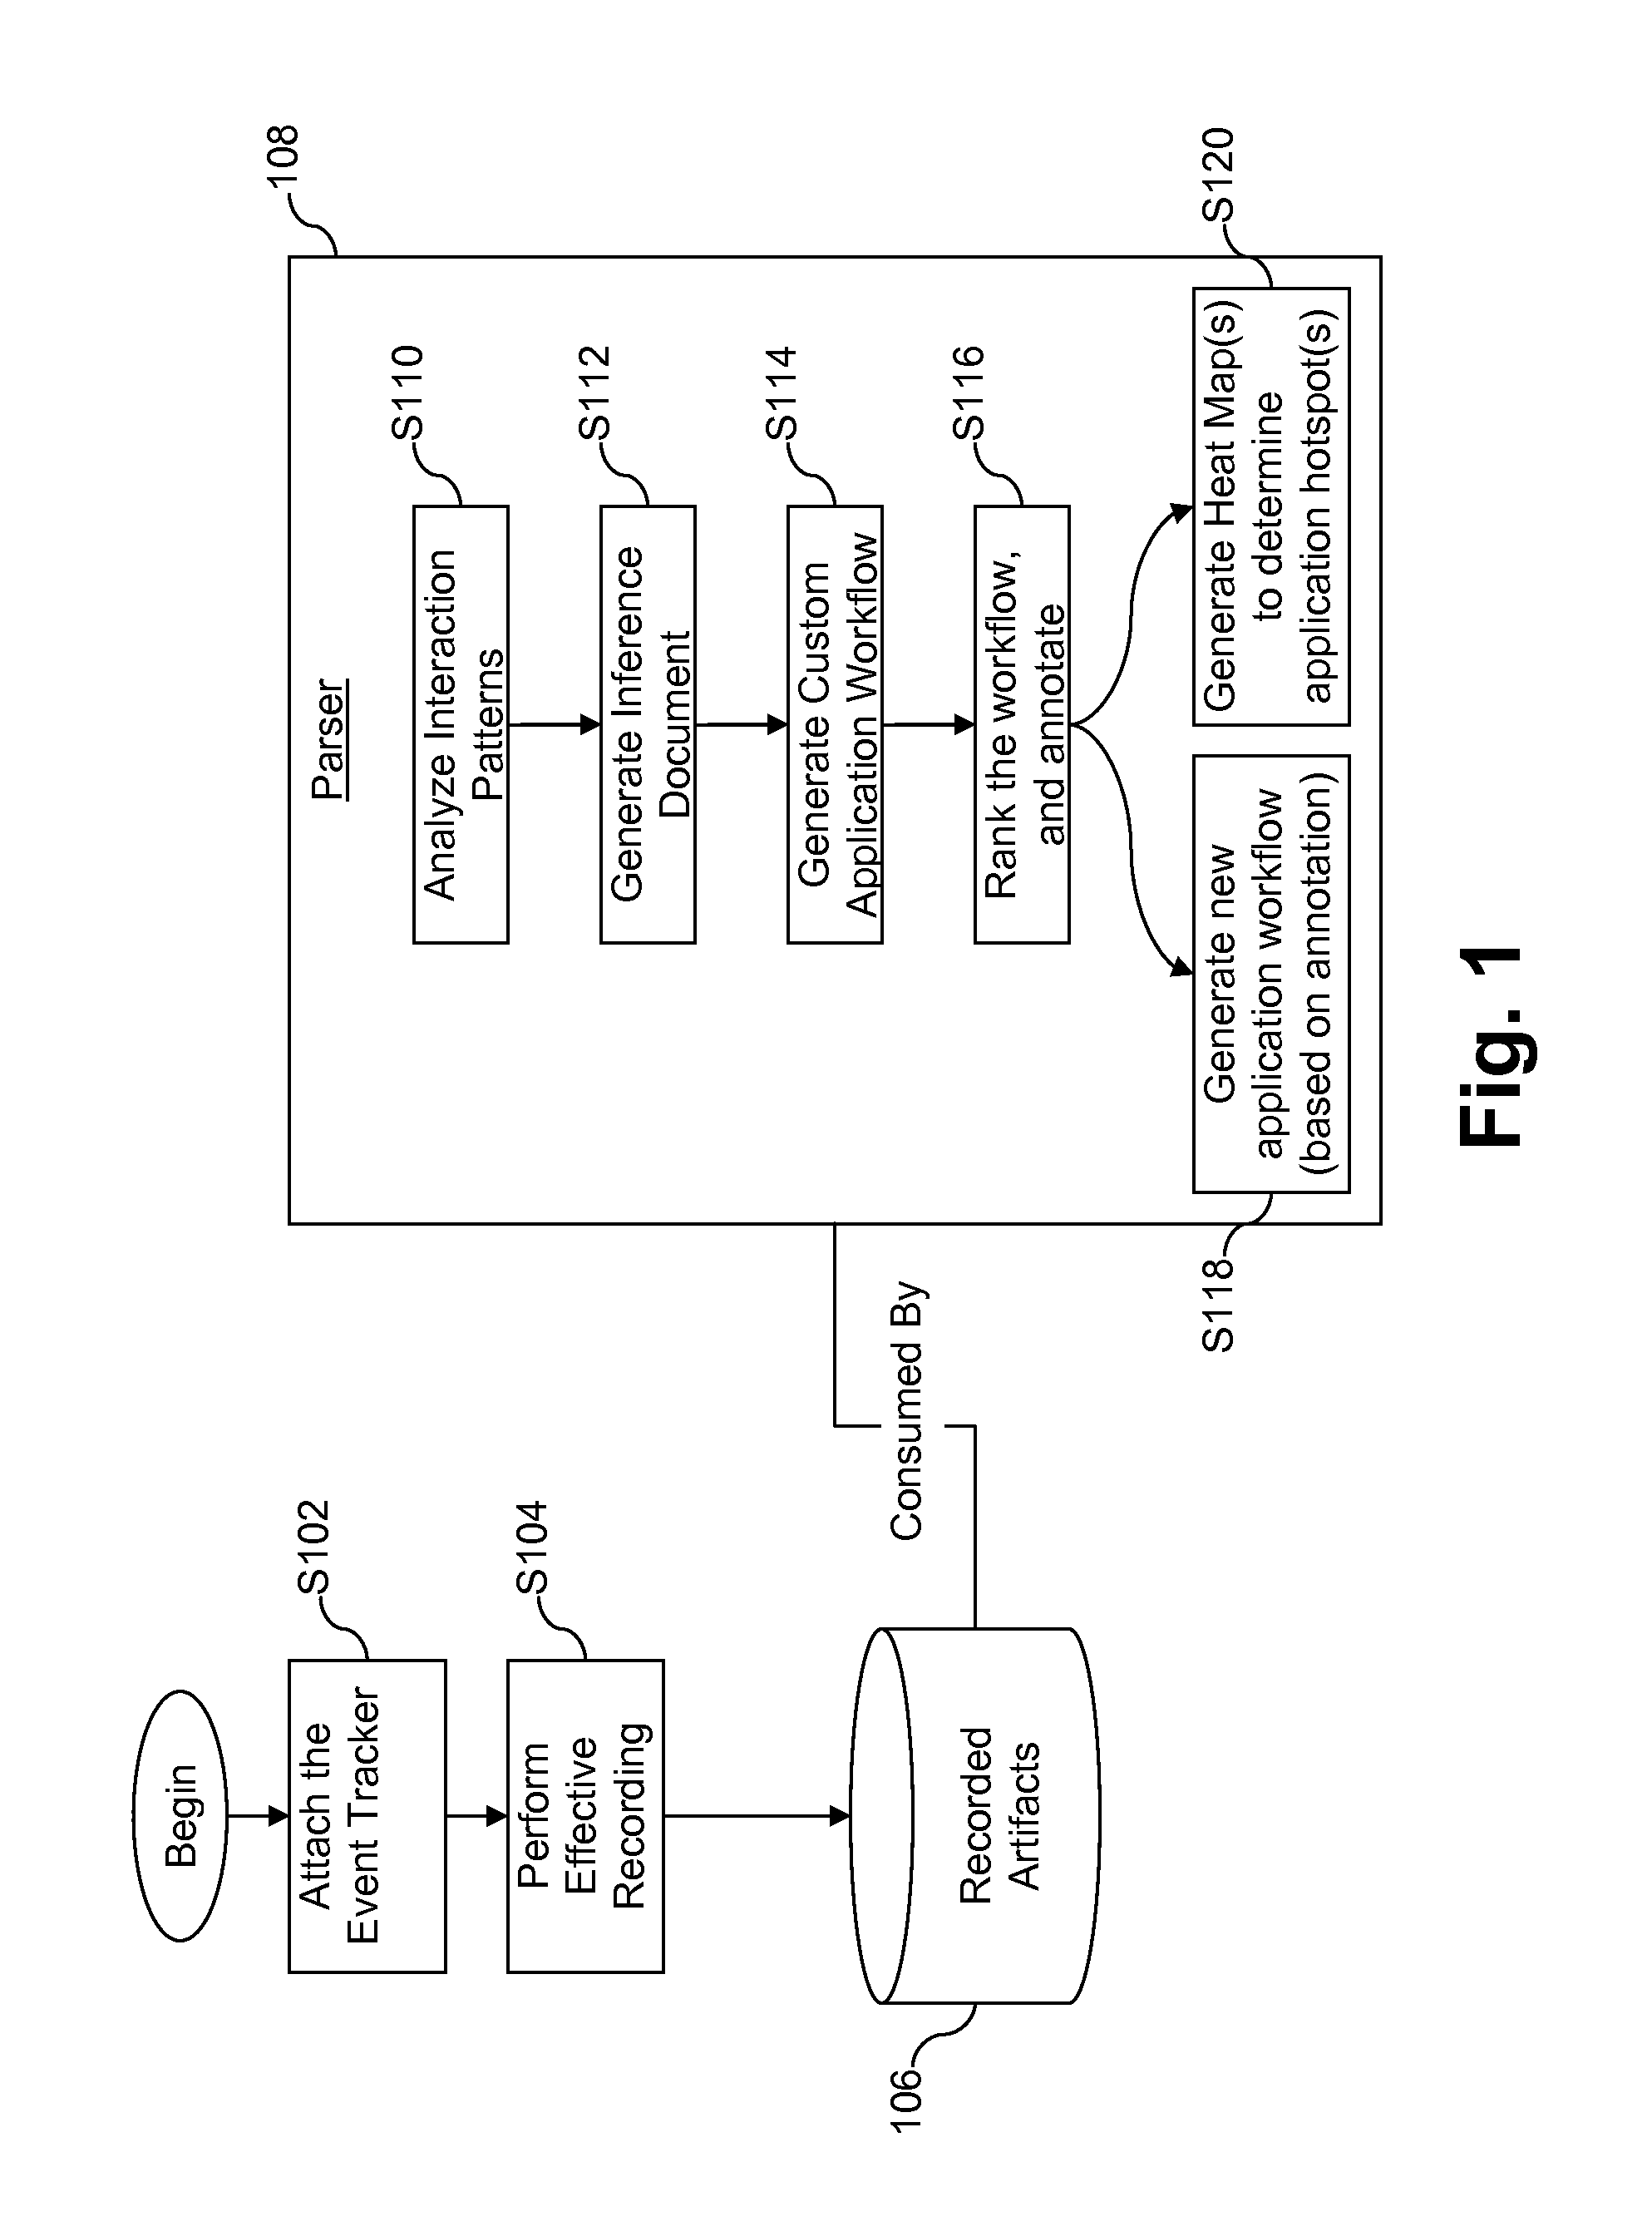 Methods for building application intelligence into event driven applications through usage learning, and systems supporting such applications